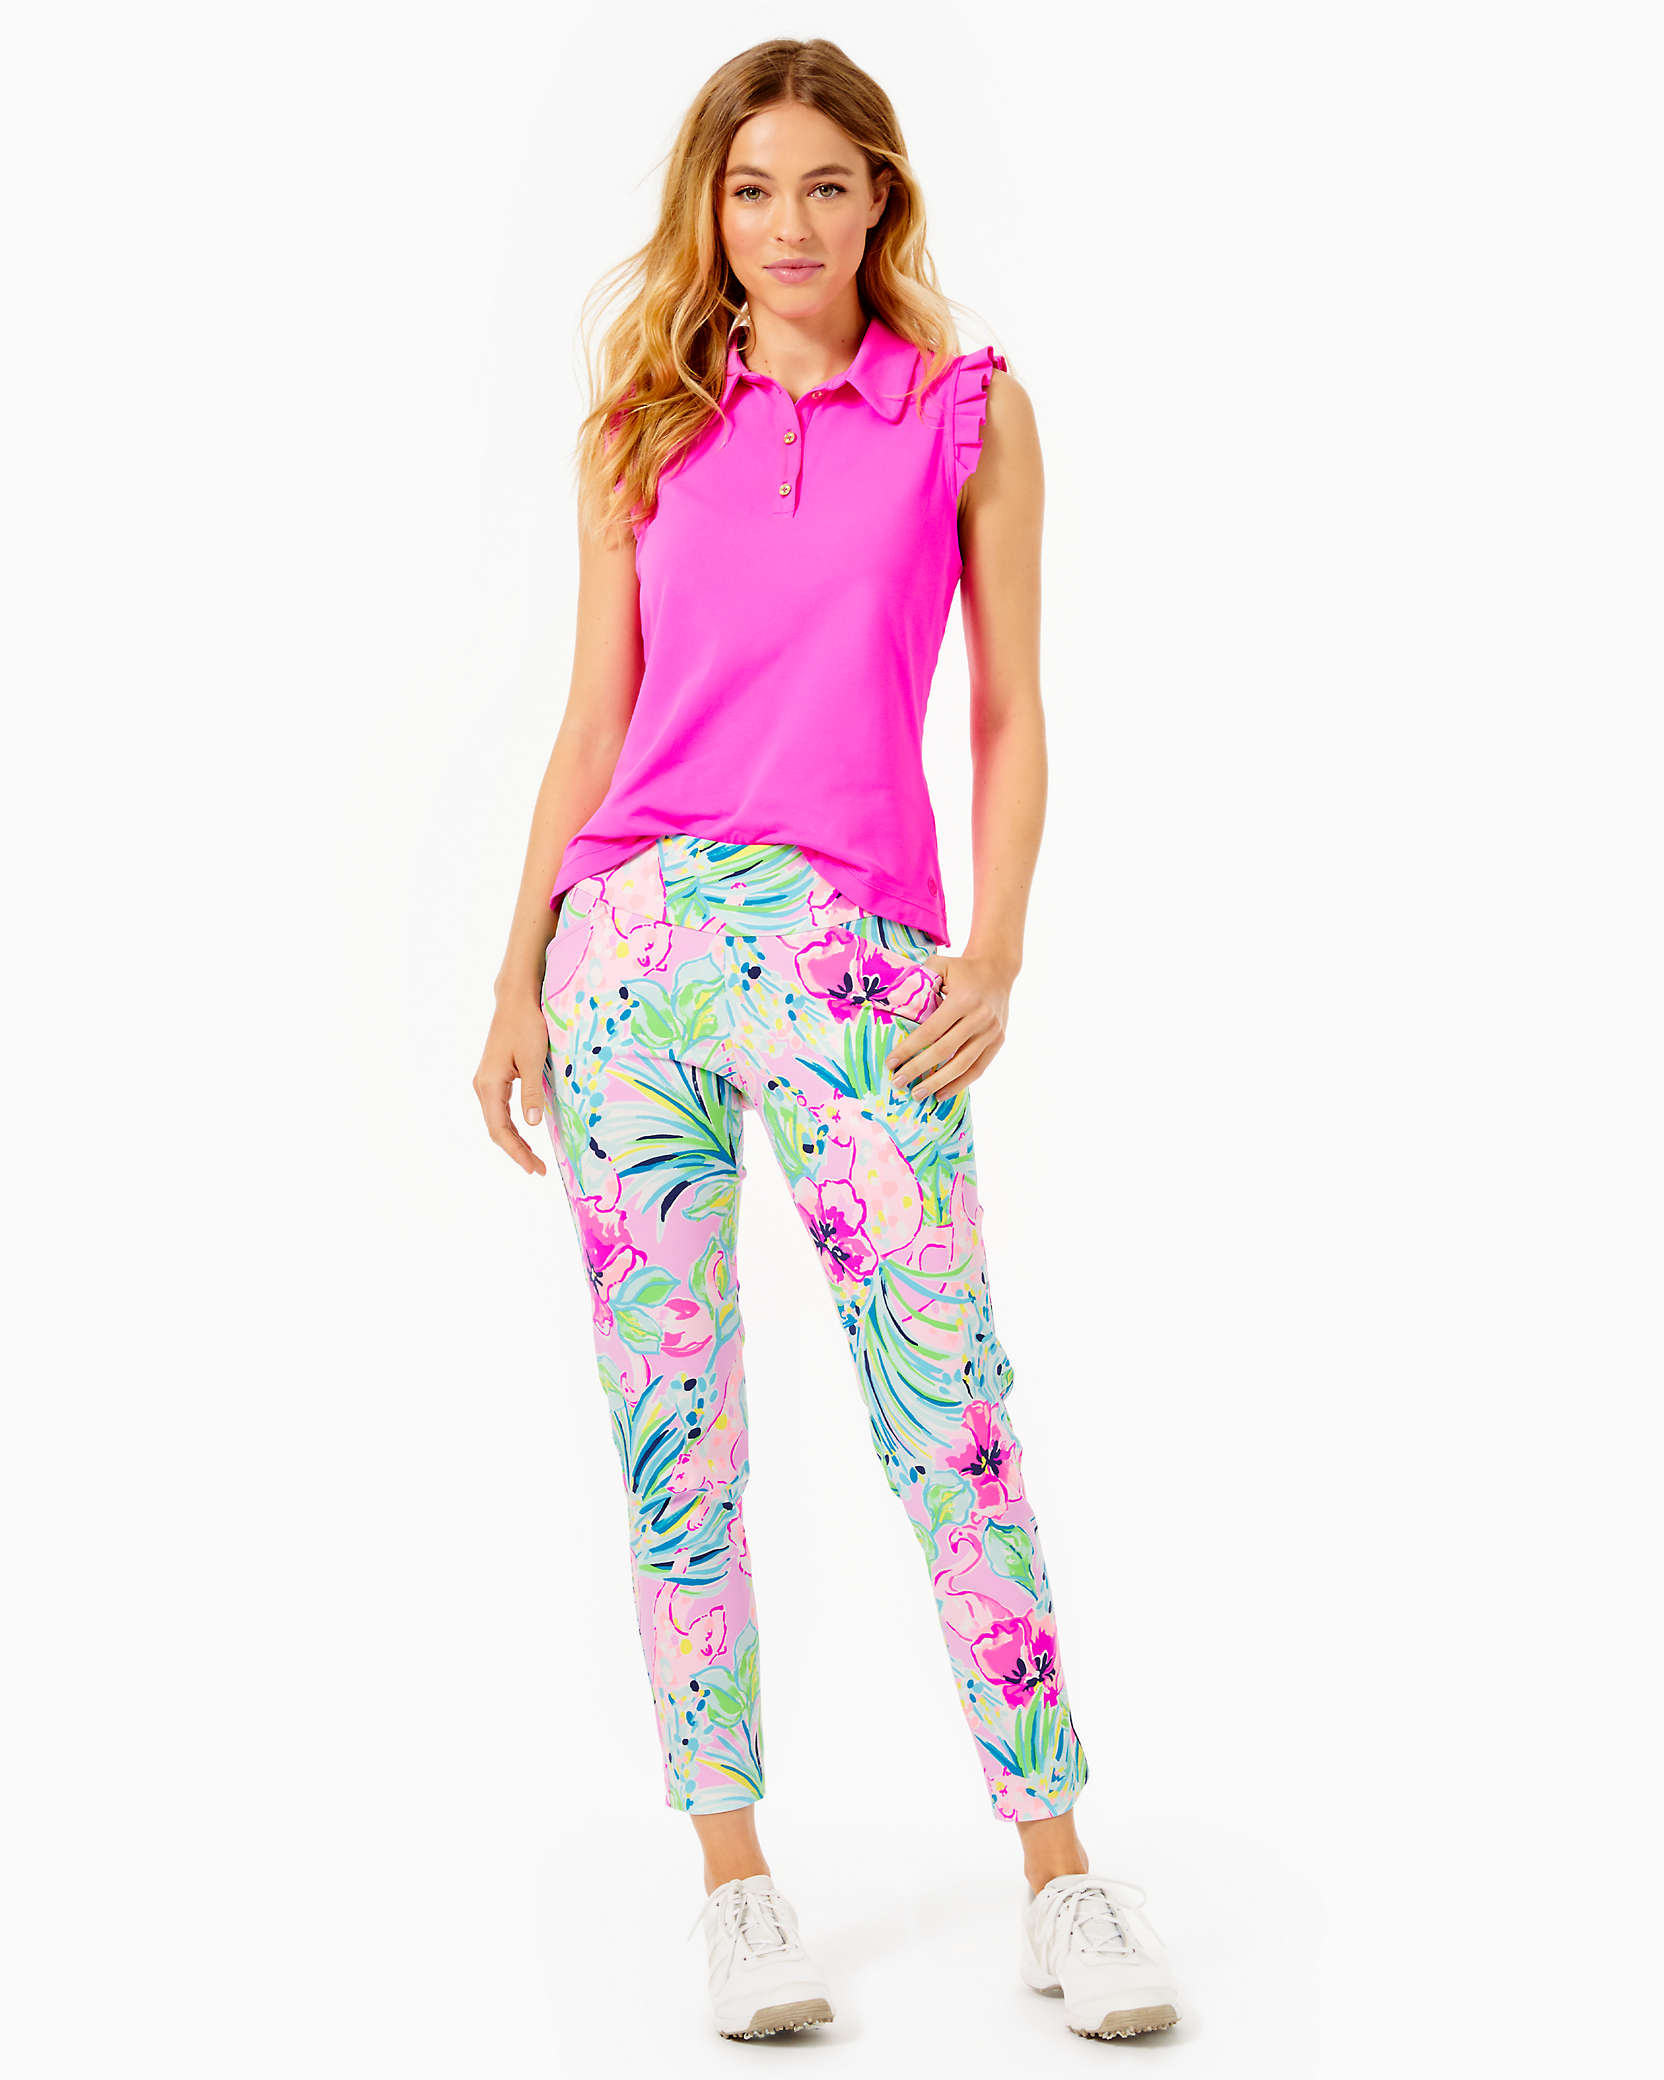 Lilly Pulitzer Upf 50+ Luxletic 28" Corso Pant In Multi Flowers And Friends Golf